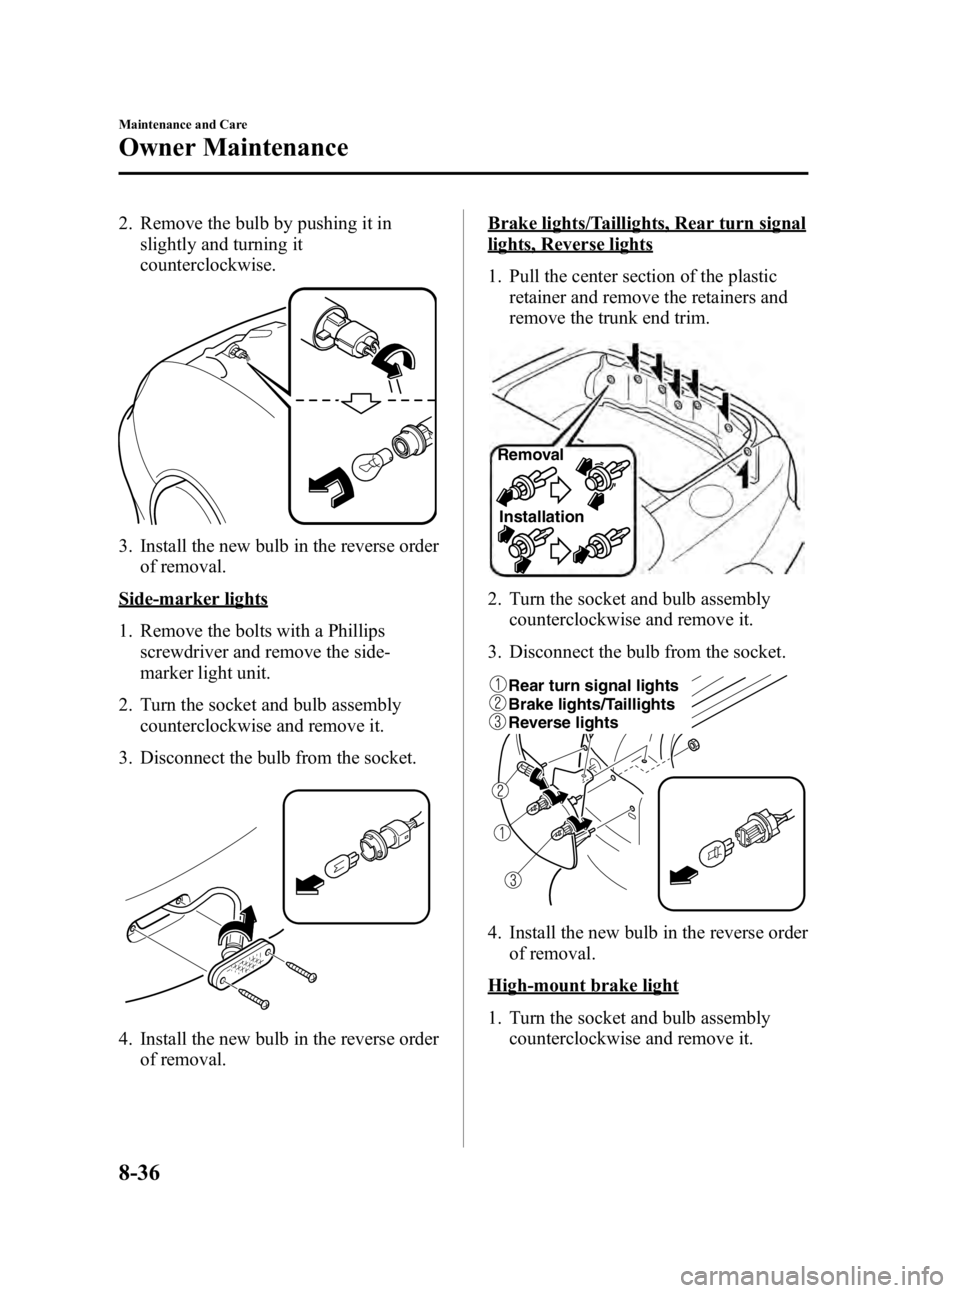 MAZDA MODEL SPEED MX-5 MIATA 2005  Owners Manual Black plate (252,1)
2. Remove the bulb by pushing it inslightly and turning it
counterclockwise.
3. Install the new bulb in the reverse orderof removal.
Side-marker lights
1. Remove the bolts with a P